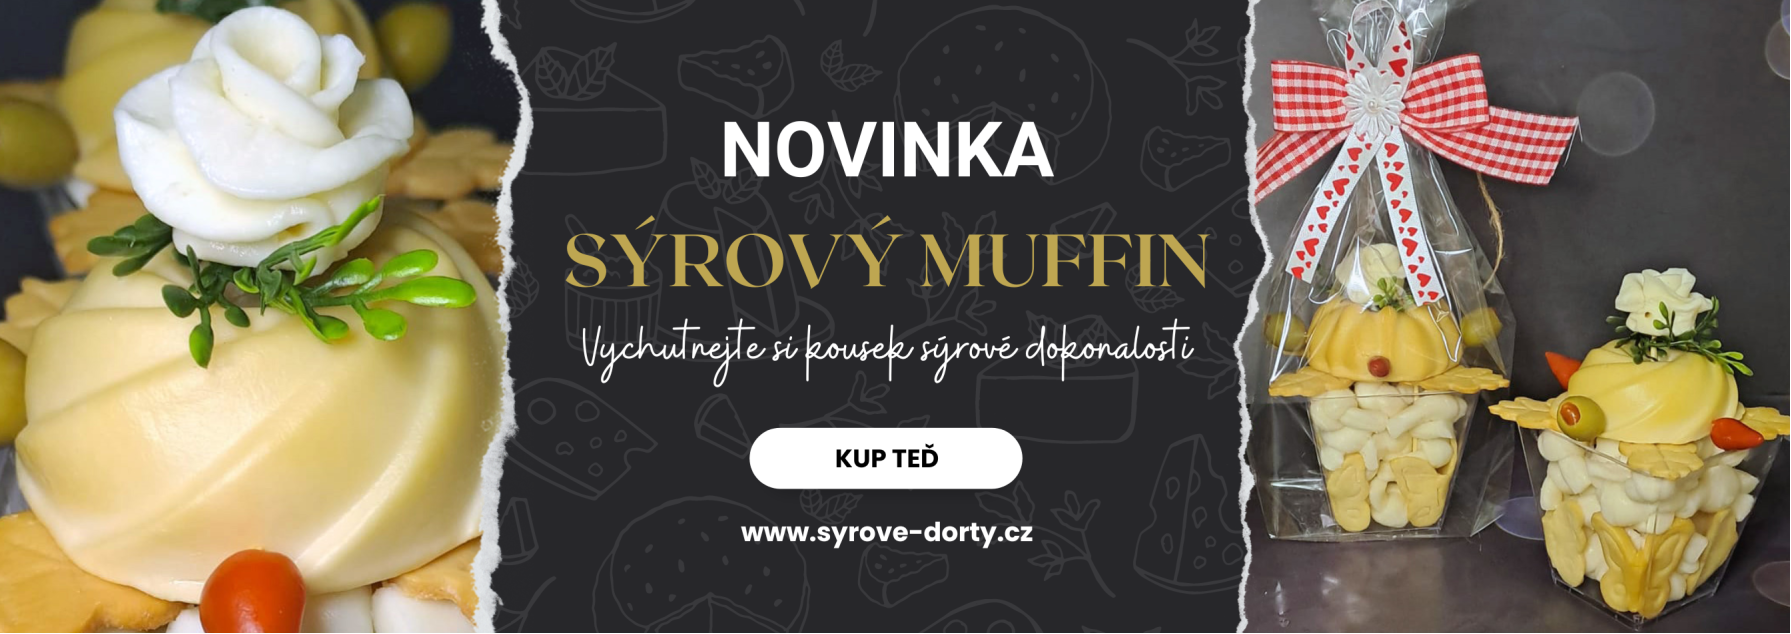 syrovy muffin